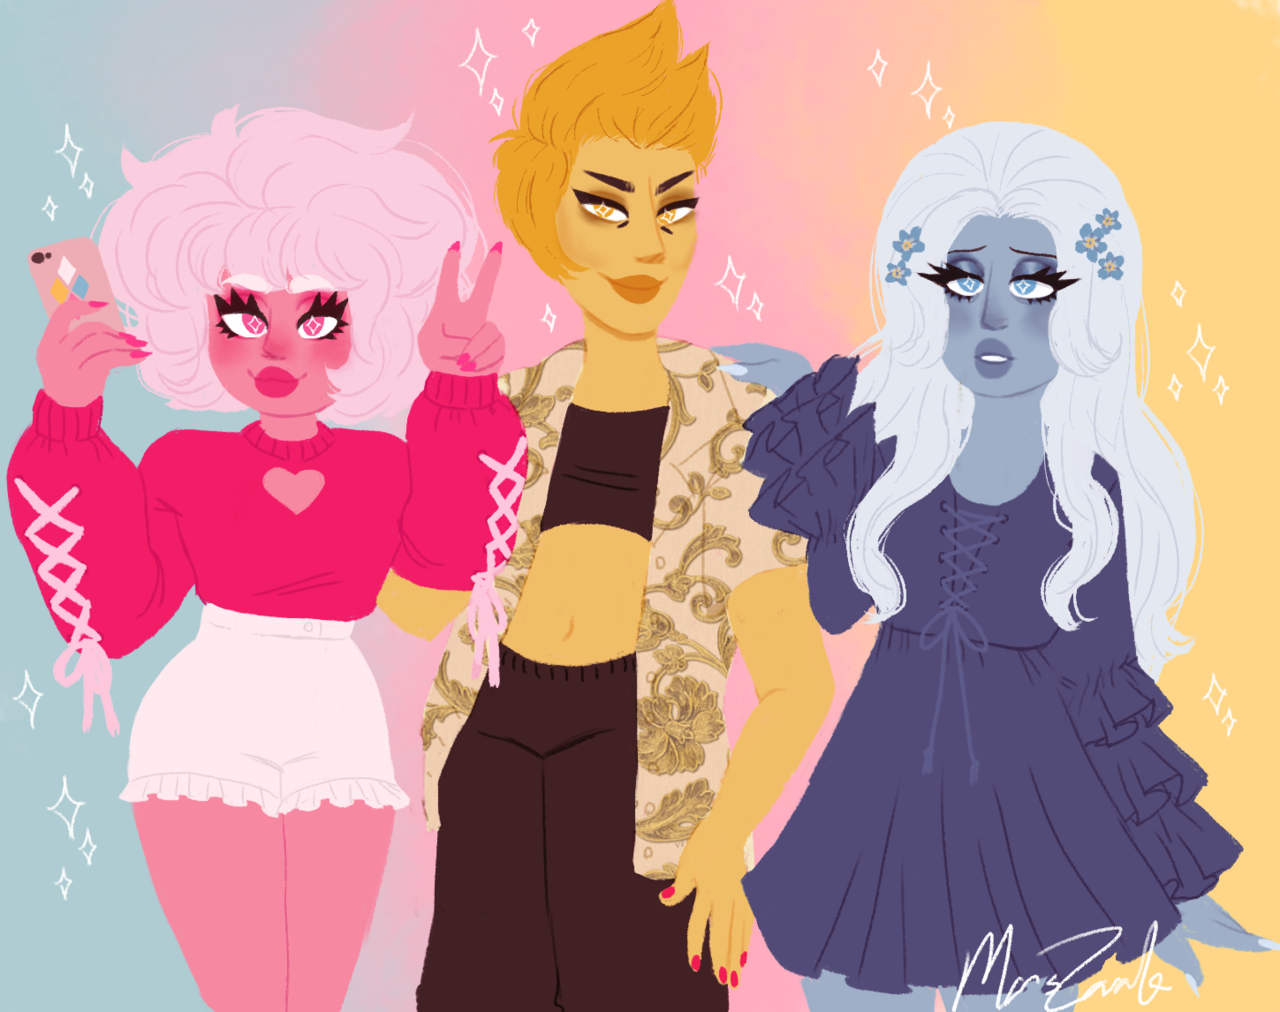 ♢ just some casual diamonds ♢